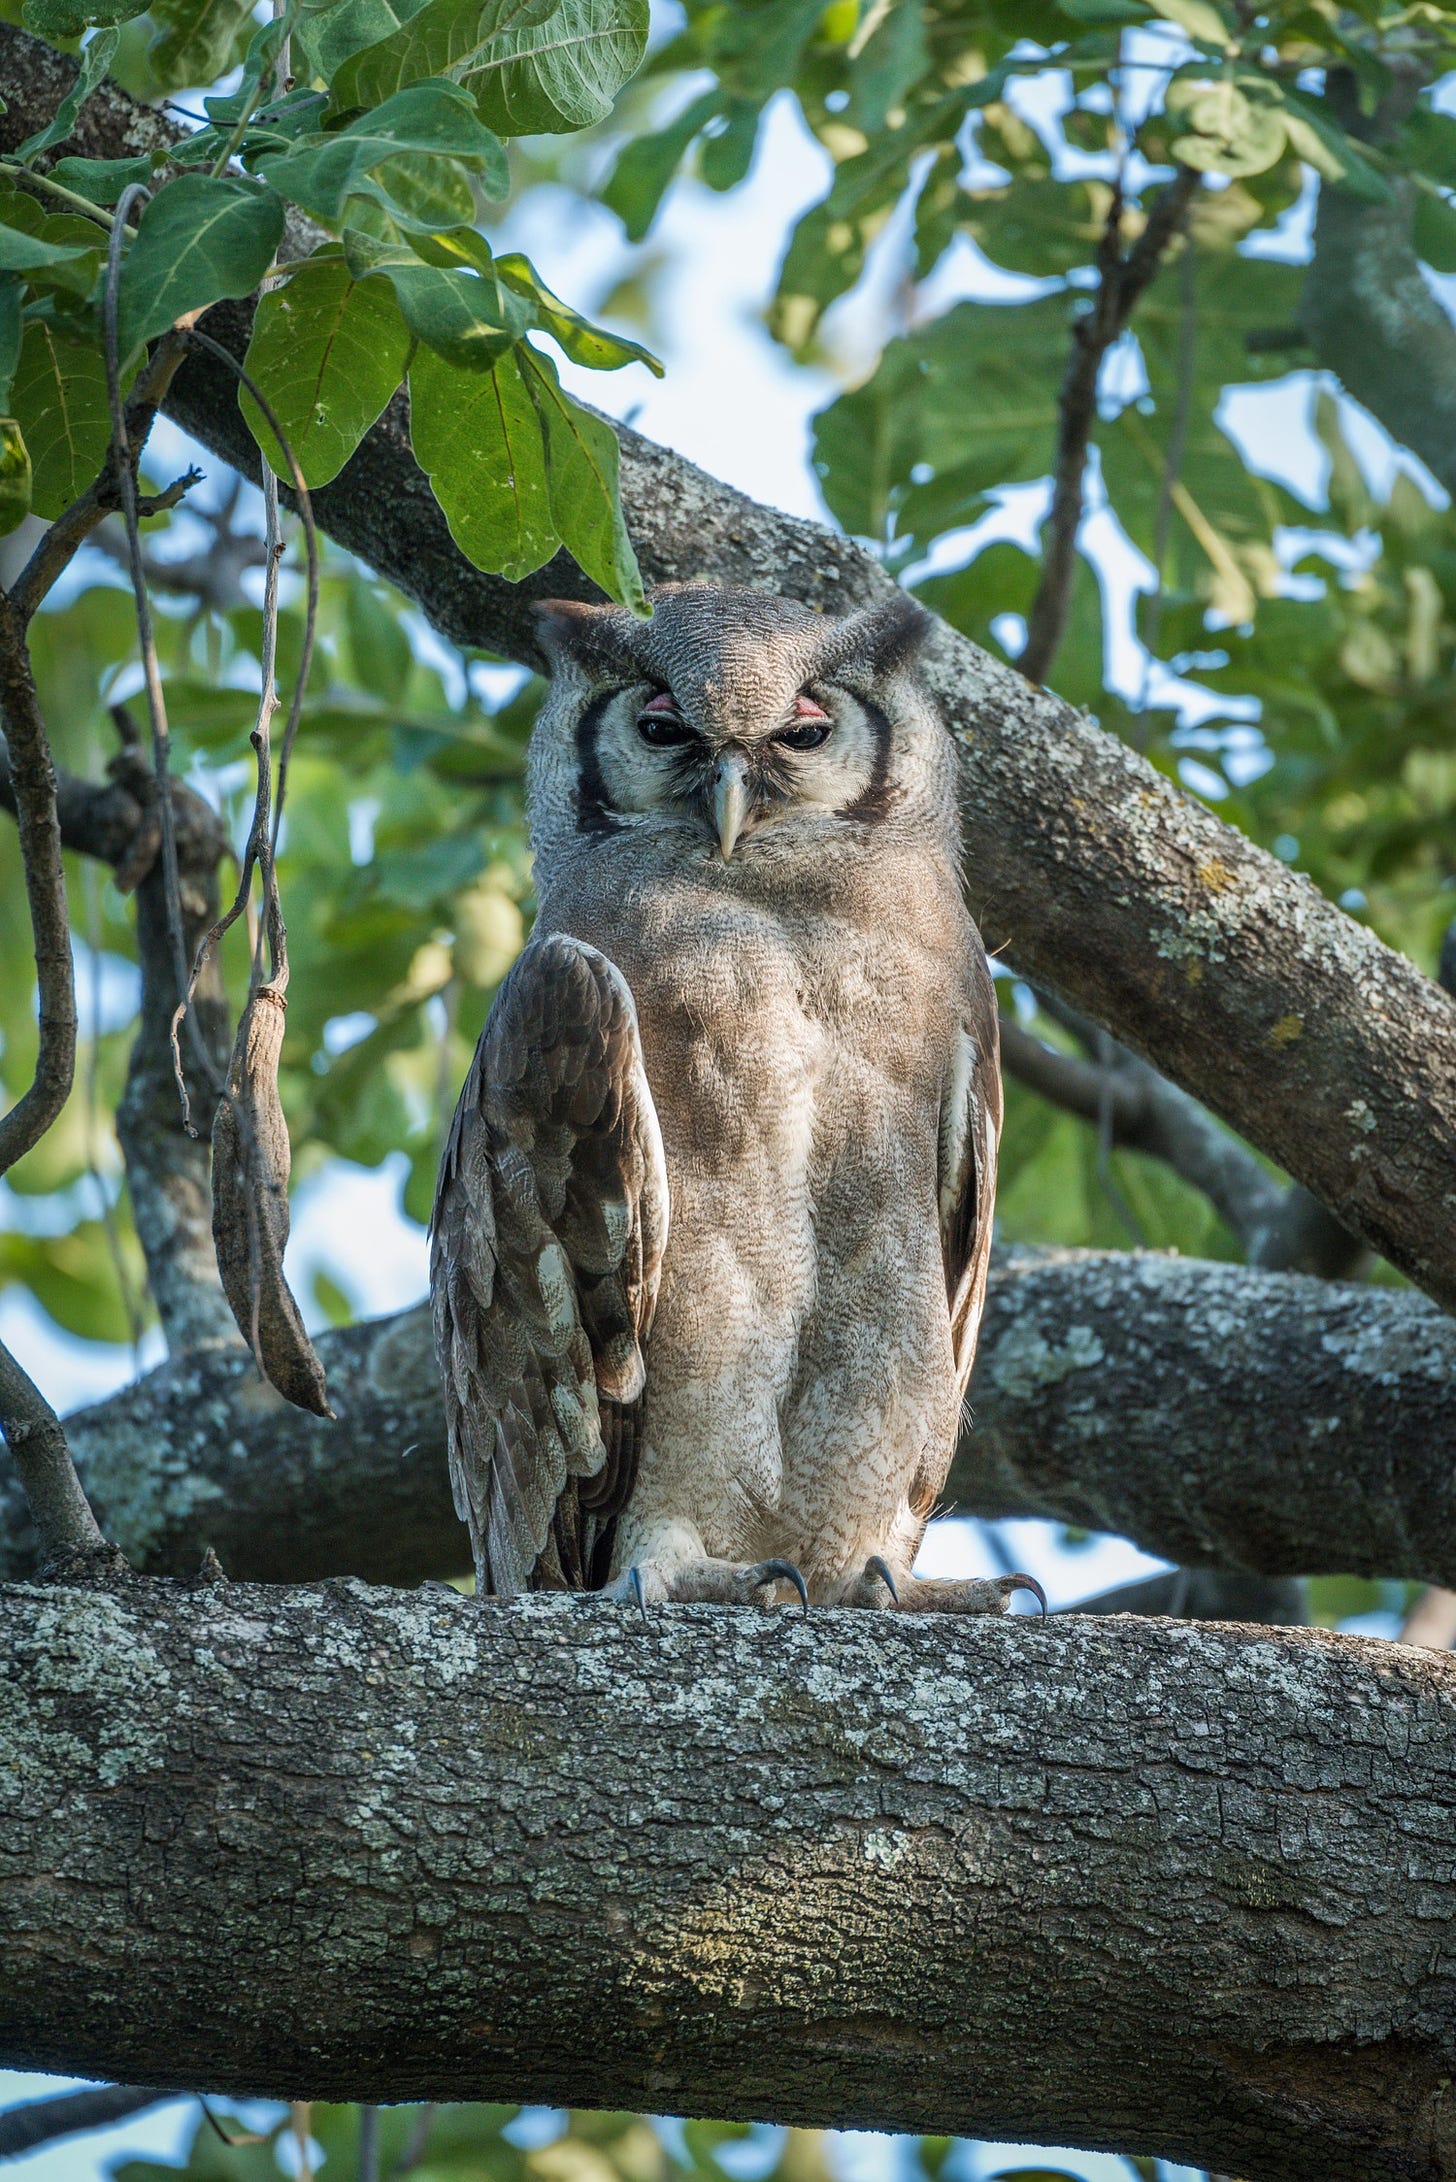 A spotted eagle owl looking very wise